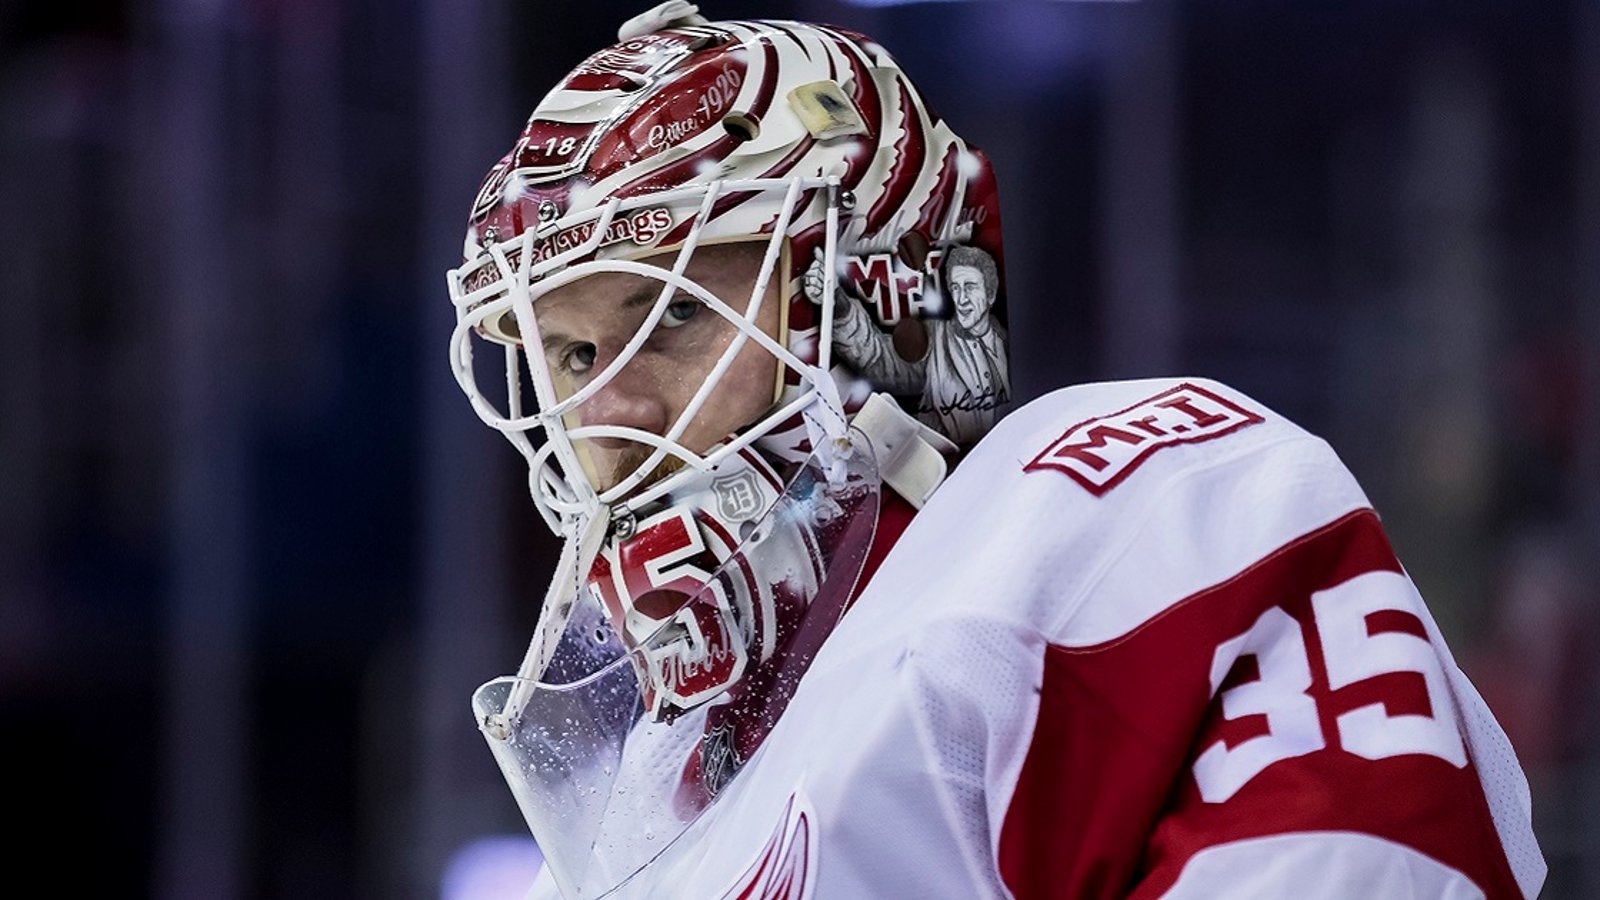 Jimmy Howard expected to announce his retirement.